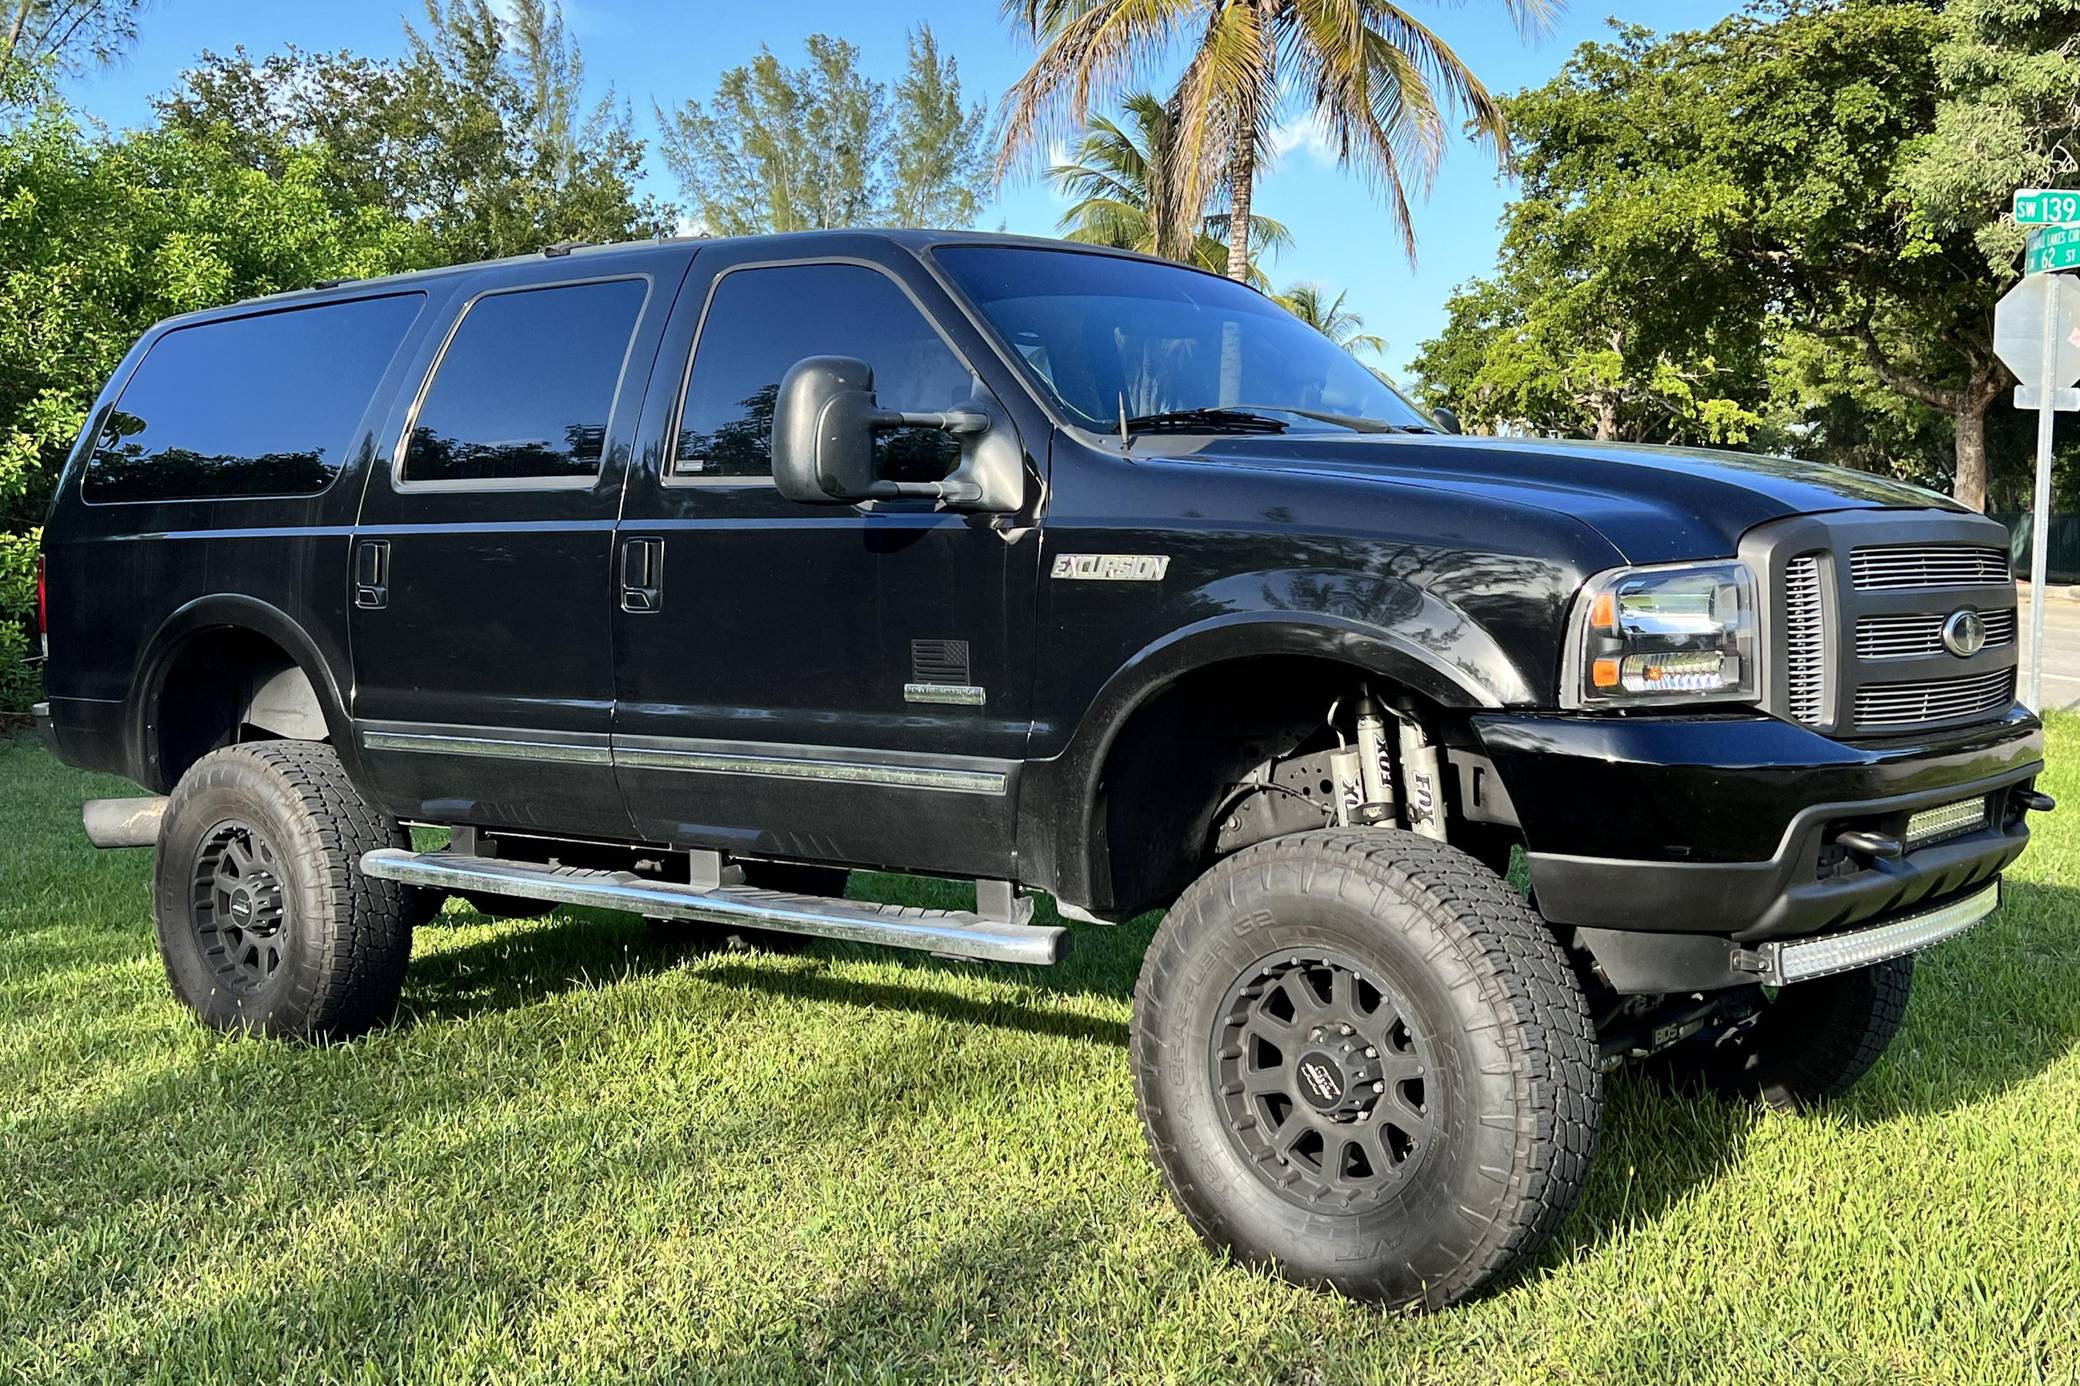 2003 ford excursion oil capacity